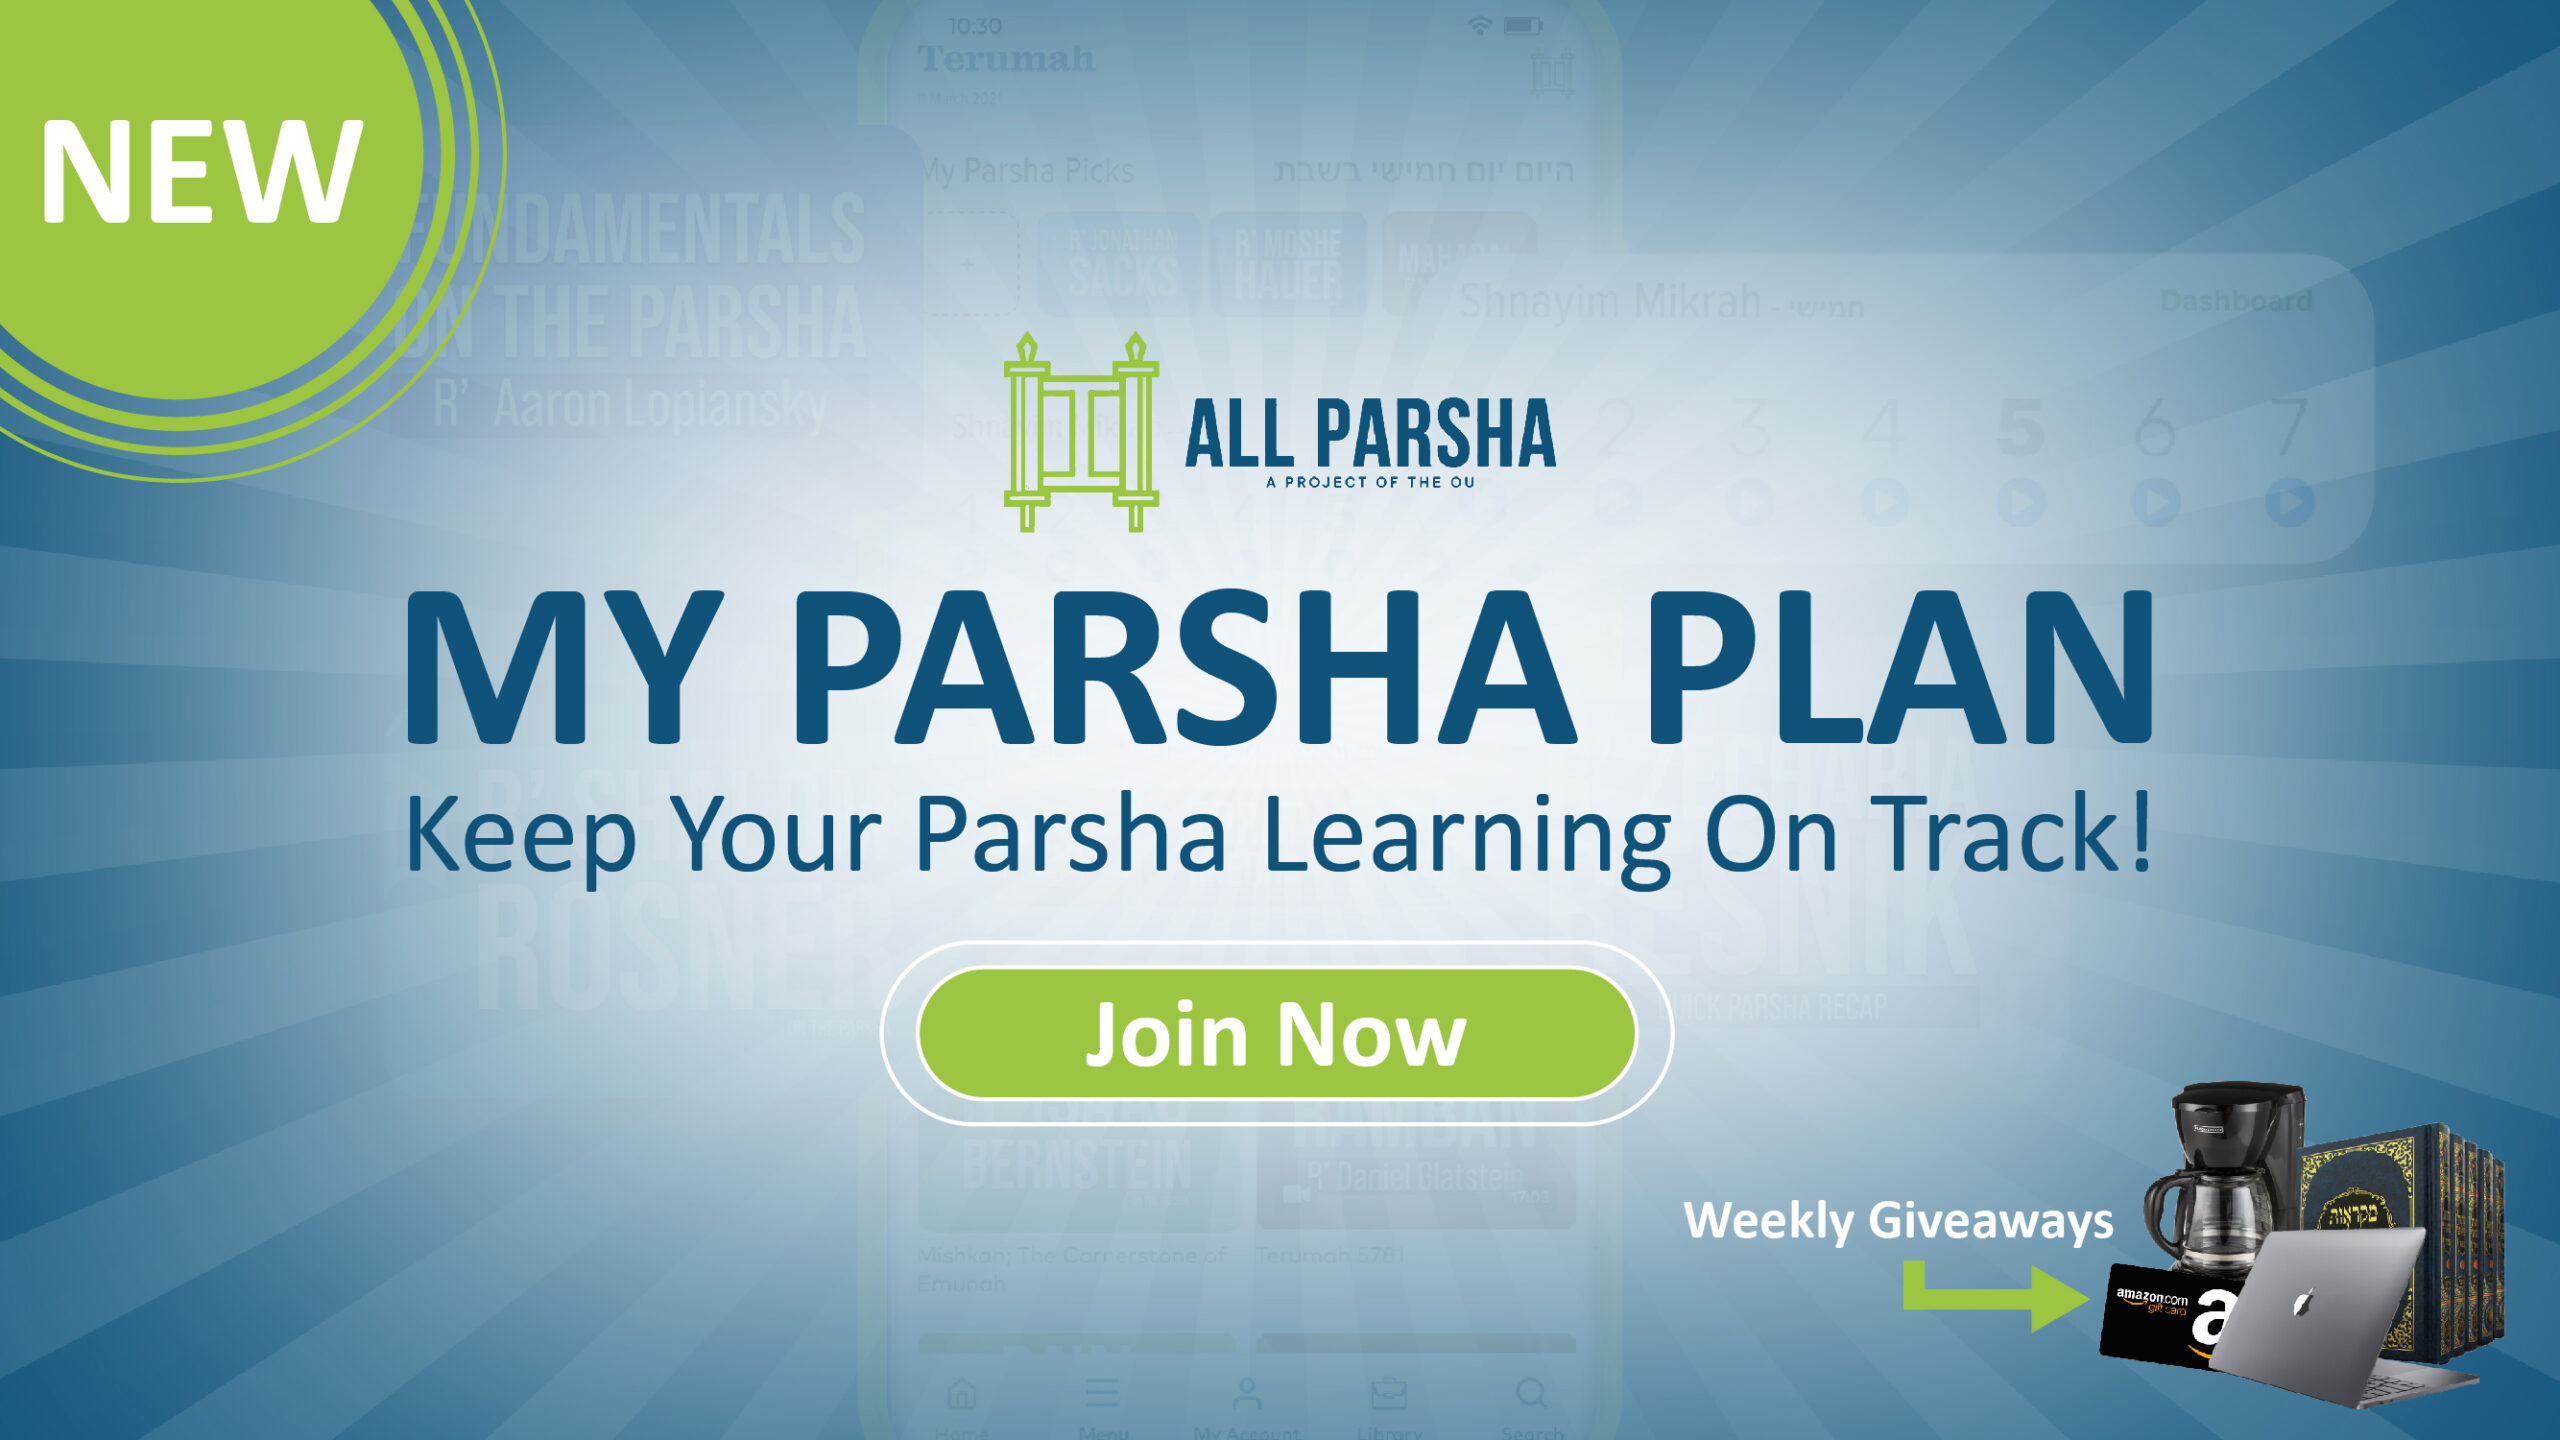 NEW! Keep Your Parsha Learning On Track! 